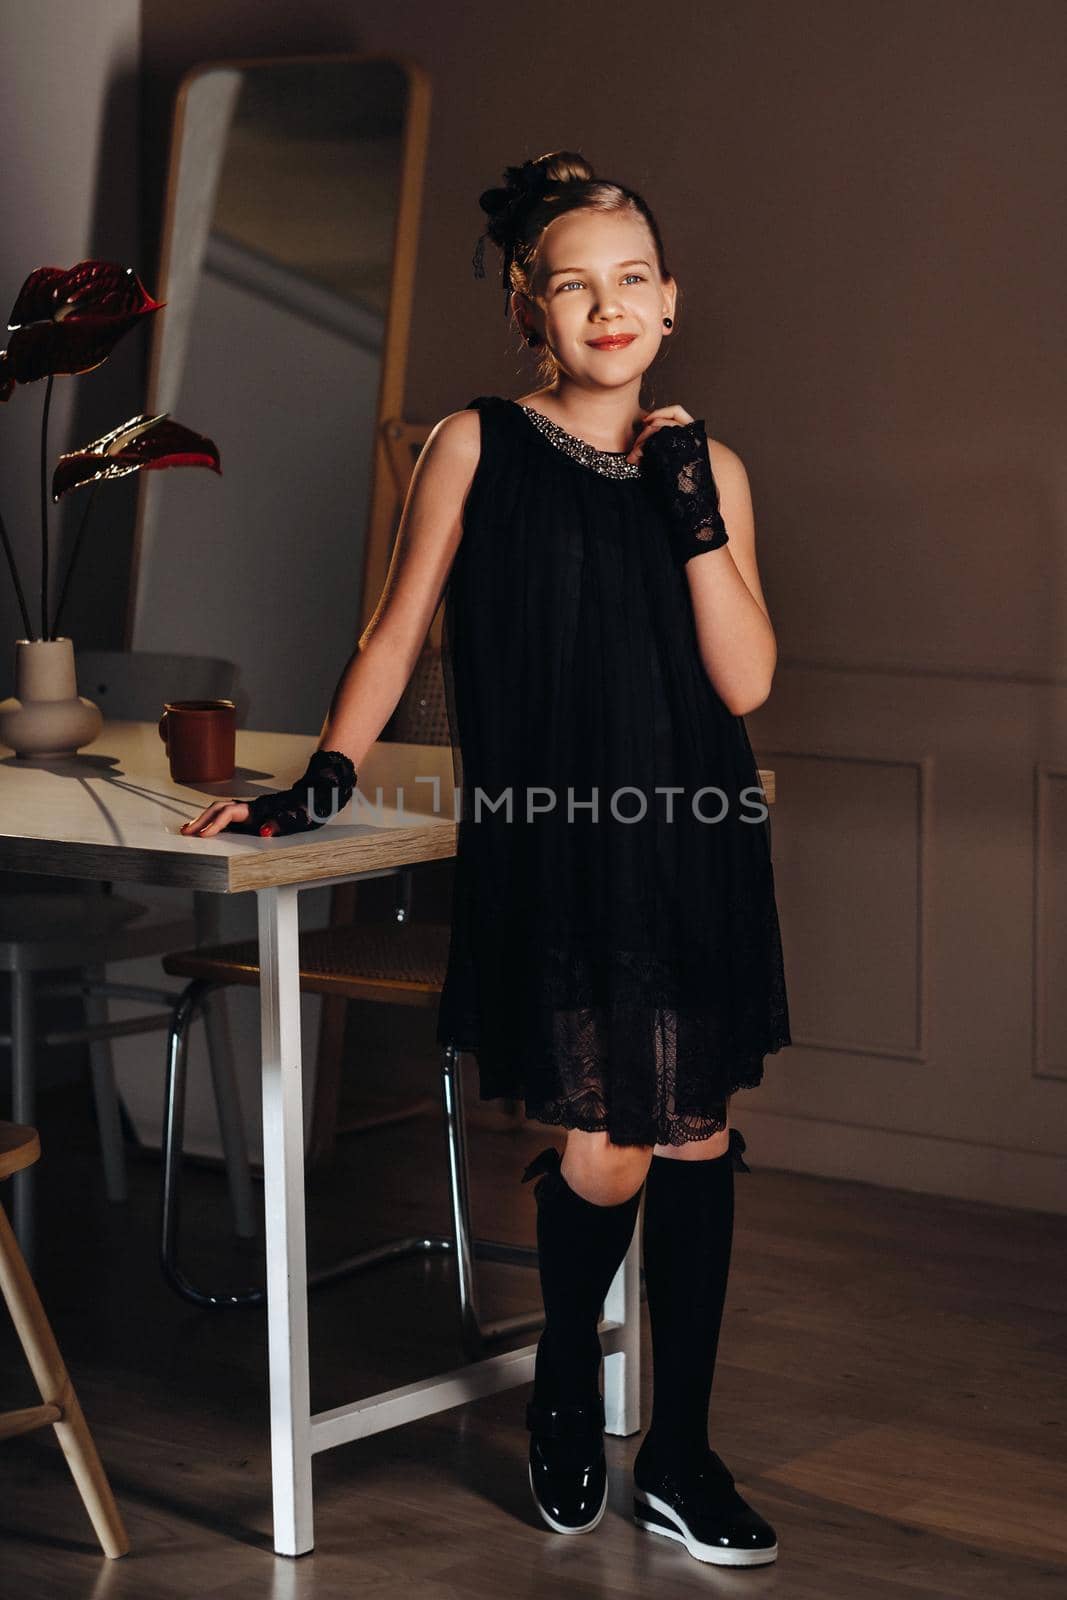 A stylish little girl in a black dress stands in the interior near the table by Lobachad